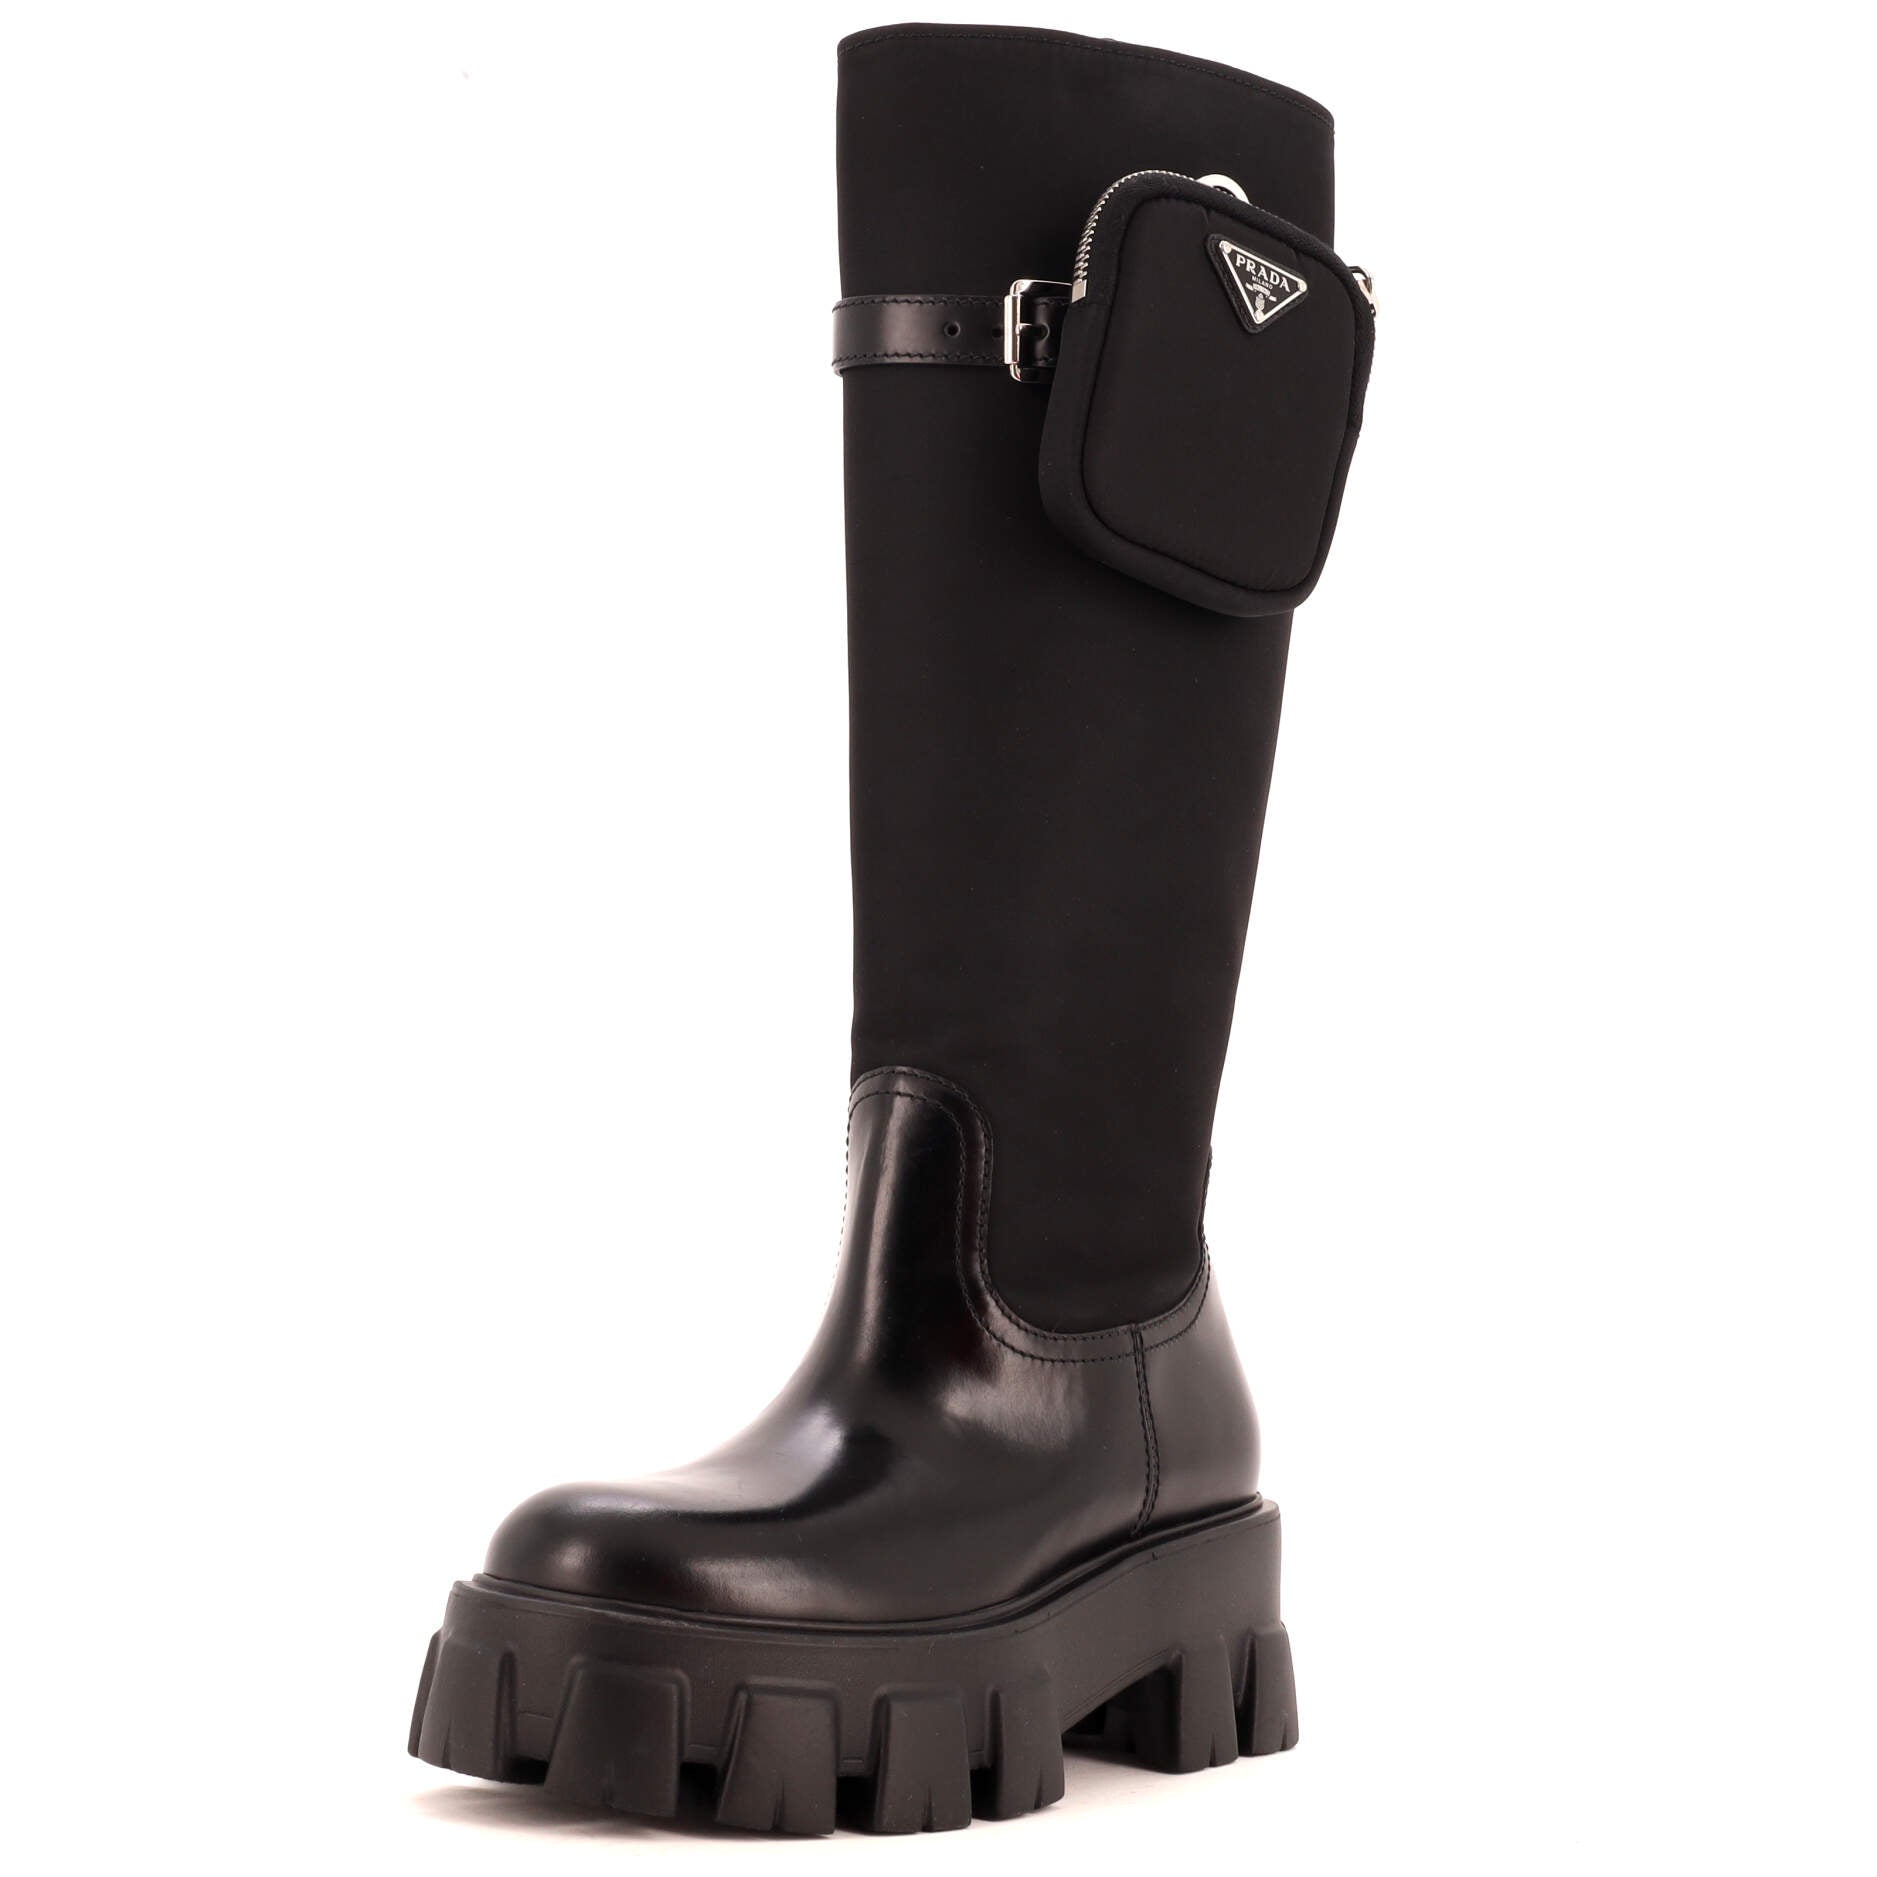 Women's Monolith Knee High Boots Nylon and Leather